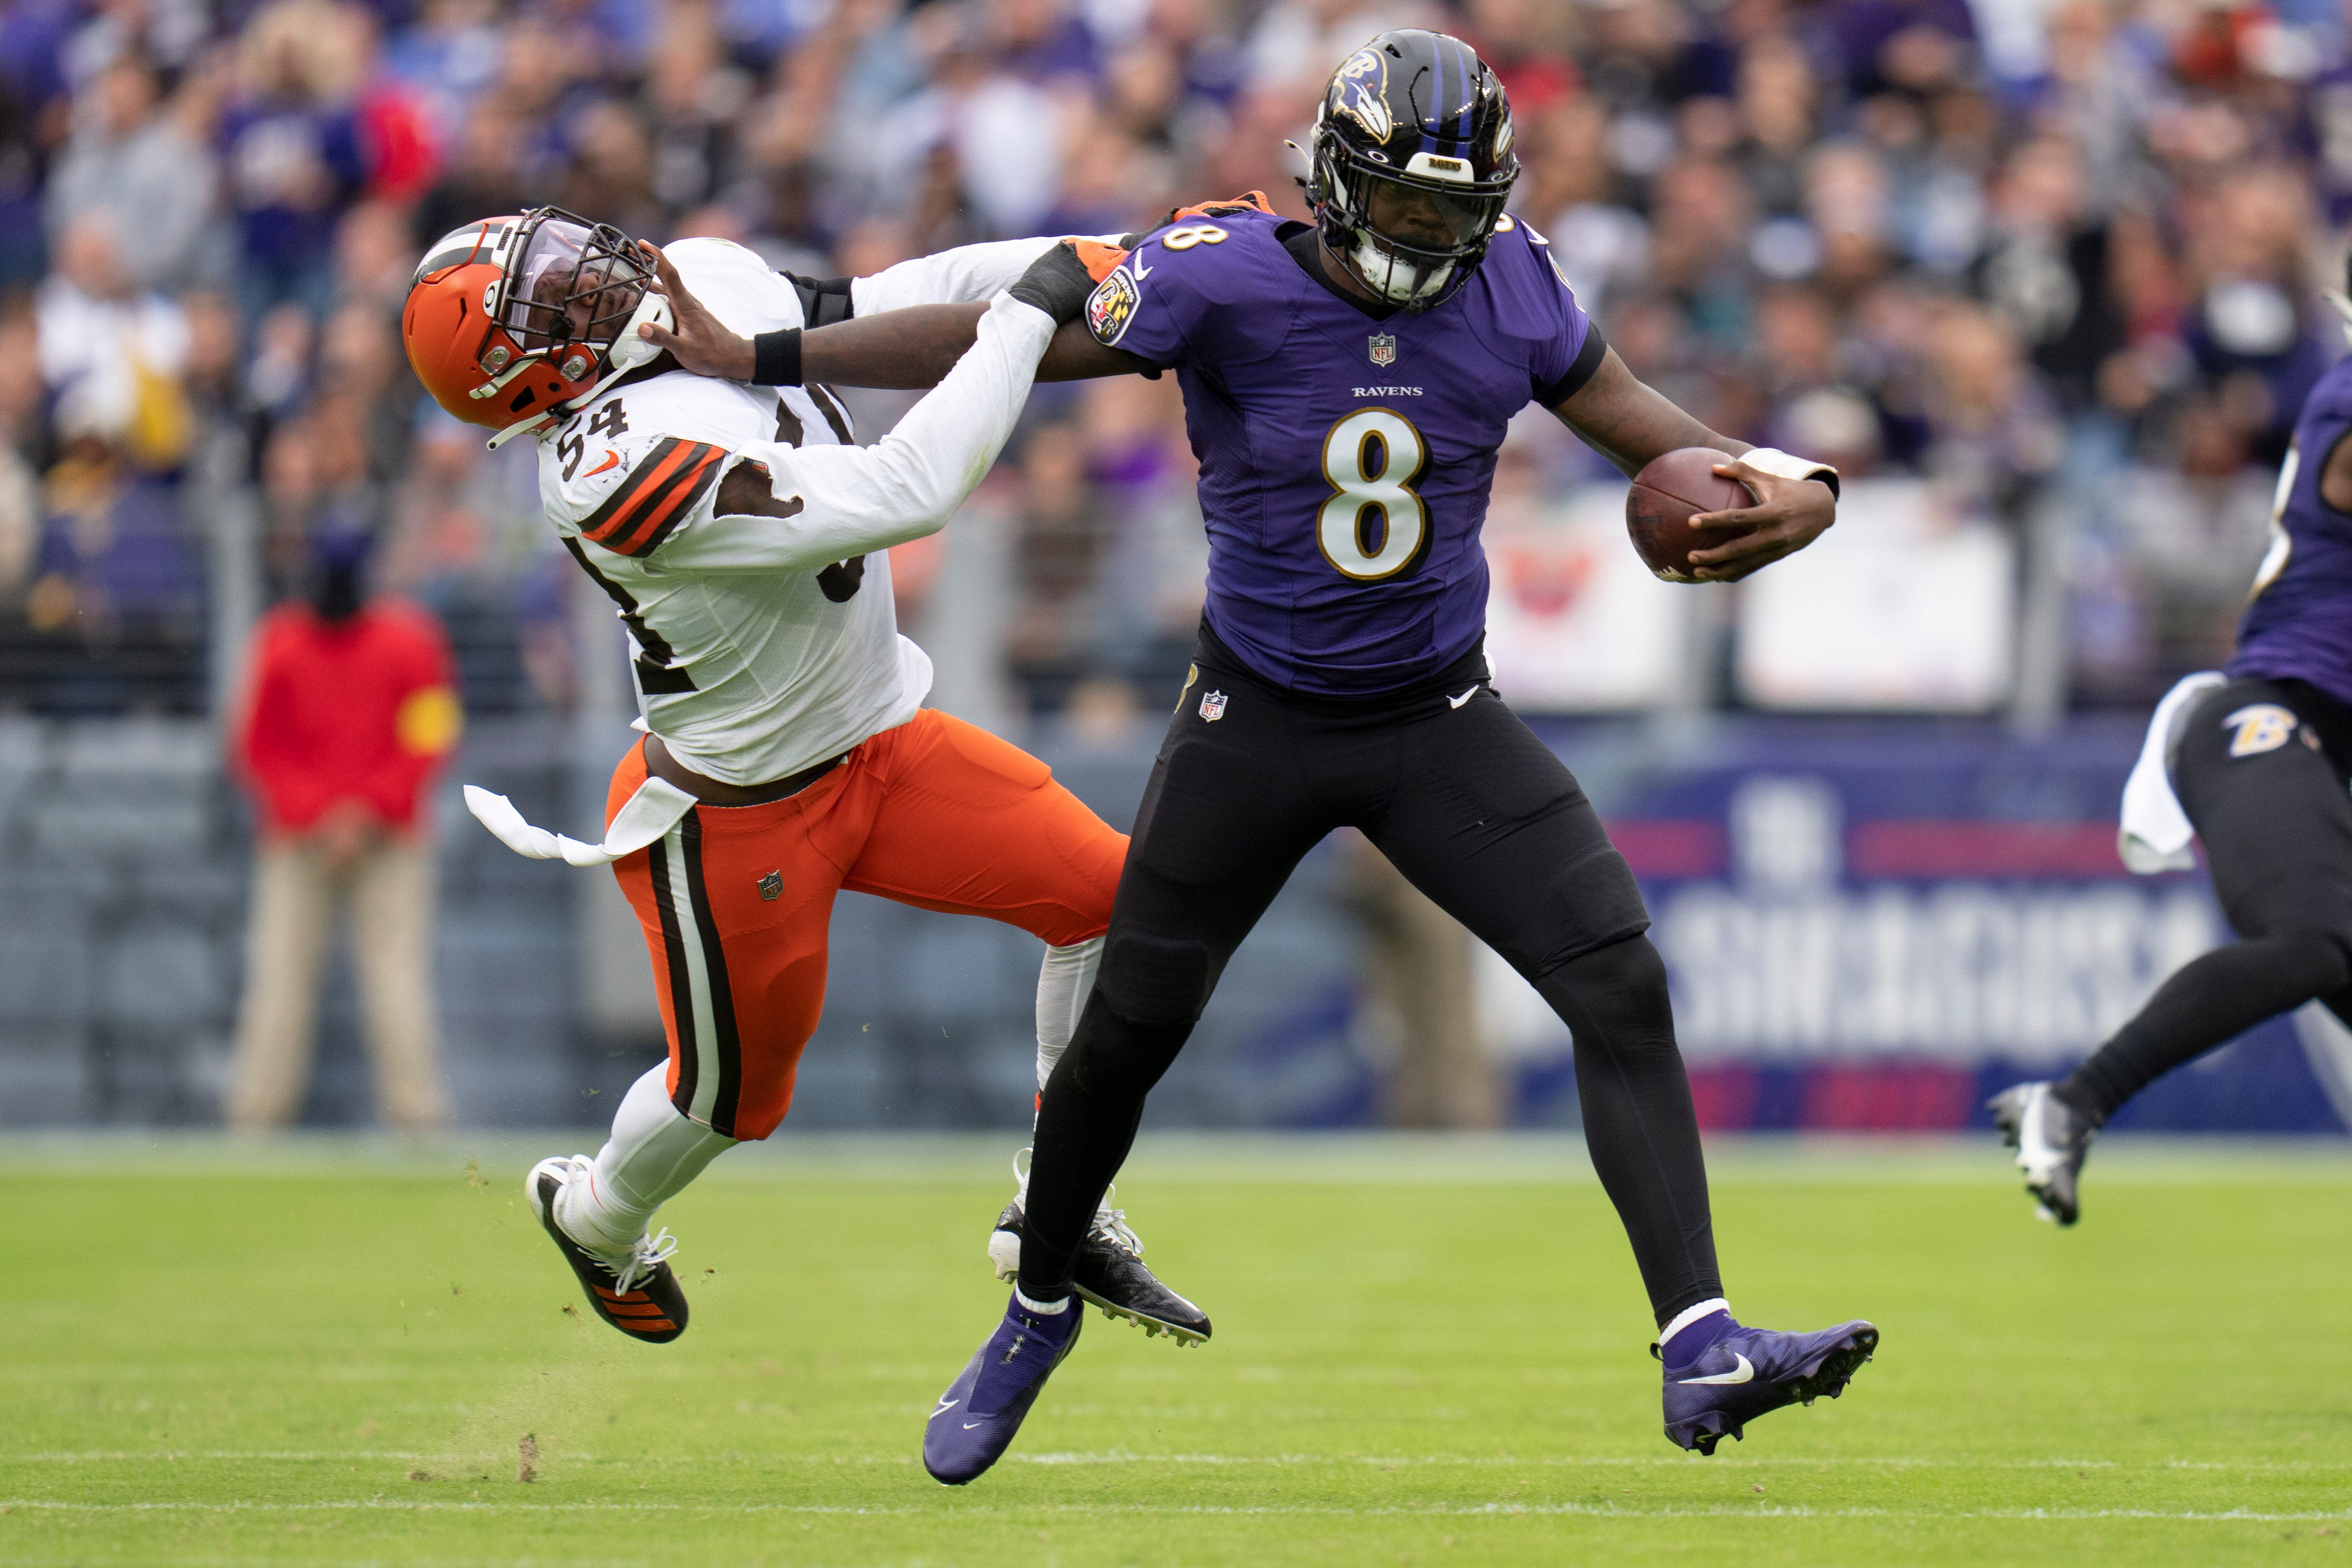 WATCH: Lamar Jackson says he looked a little slow before shedding the weight